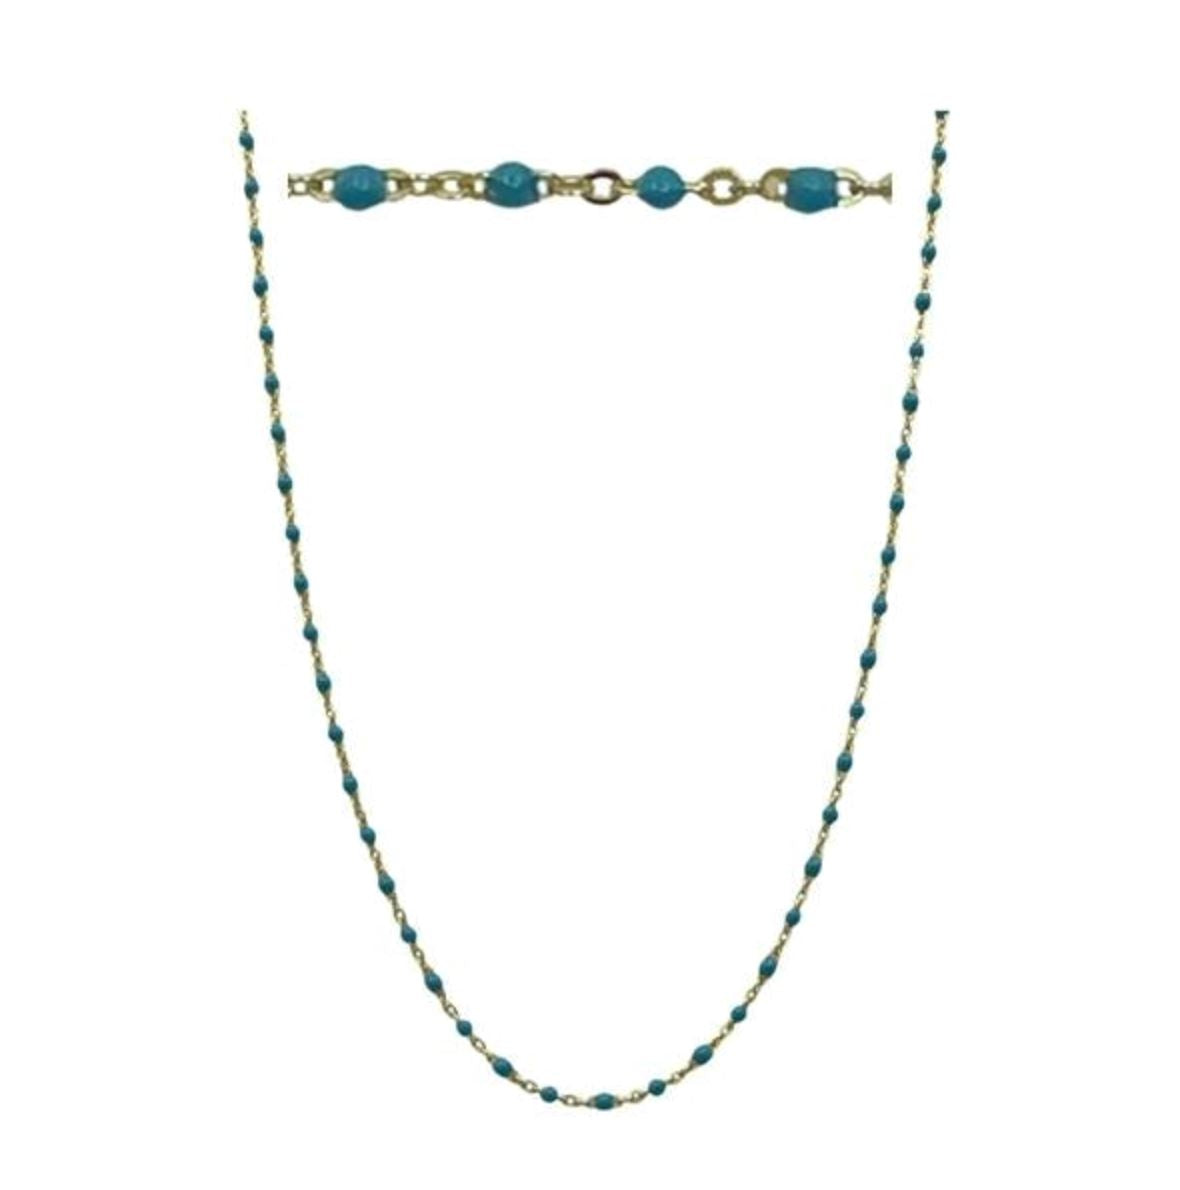 2mm Enamel Beaded Necklace: Turquoise Vermeil or Plated (_NG7004TQ) Necklaces athenadesigns 